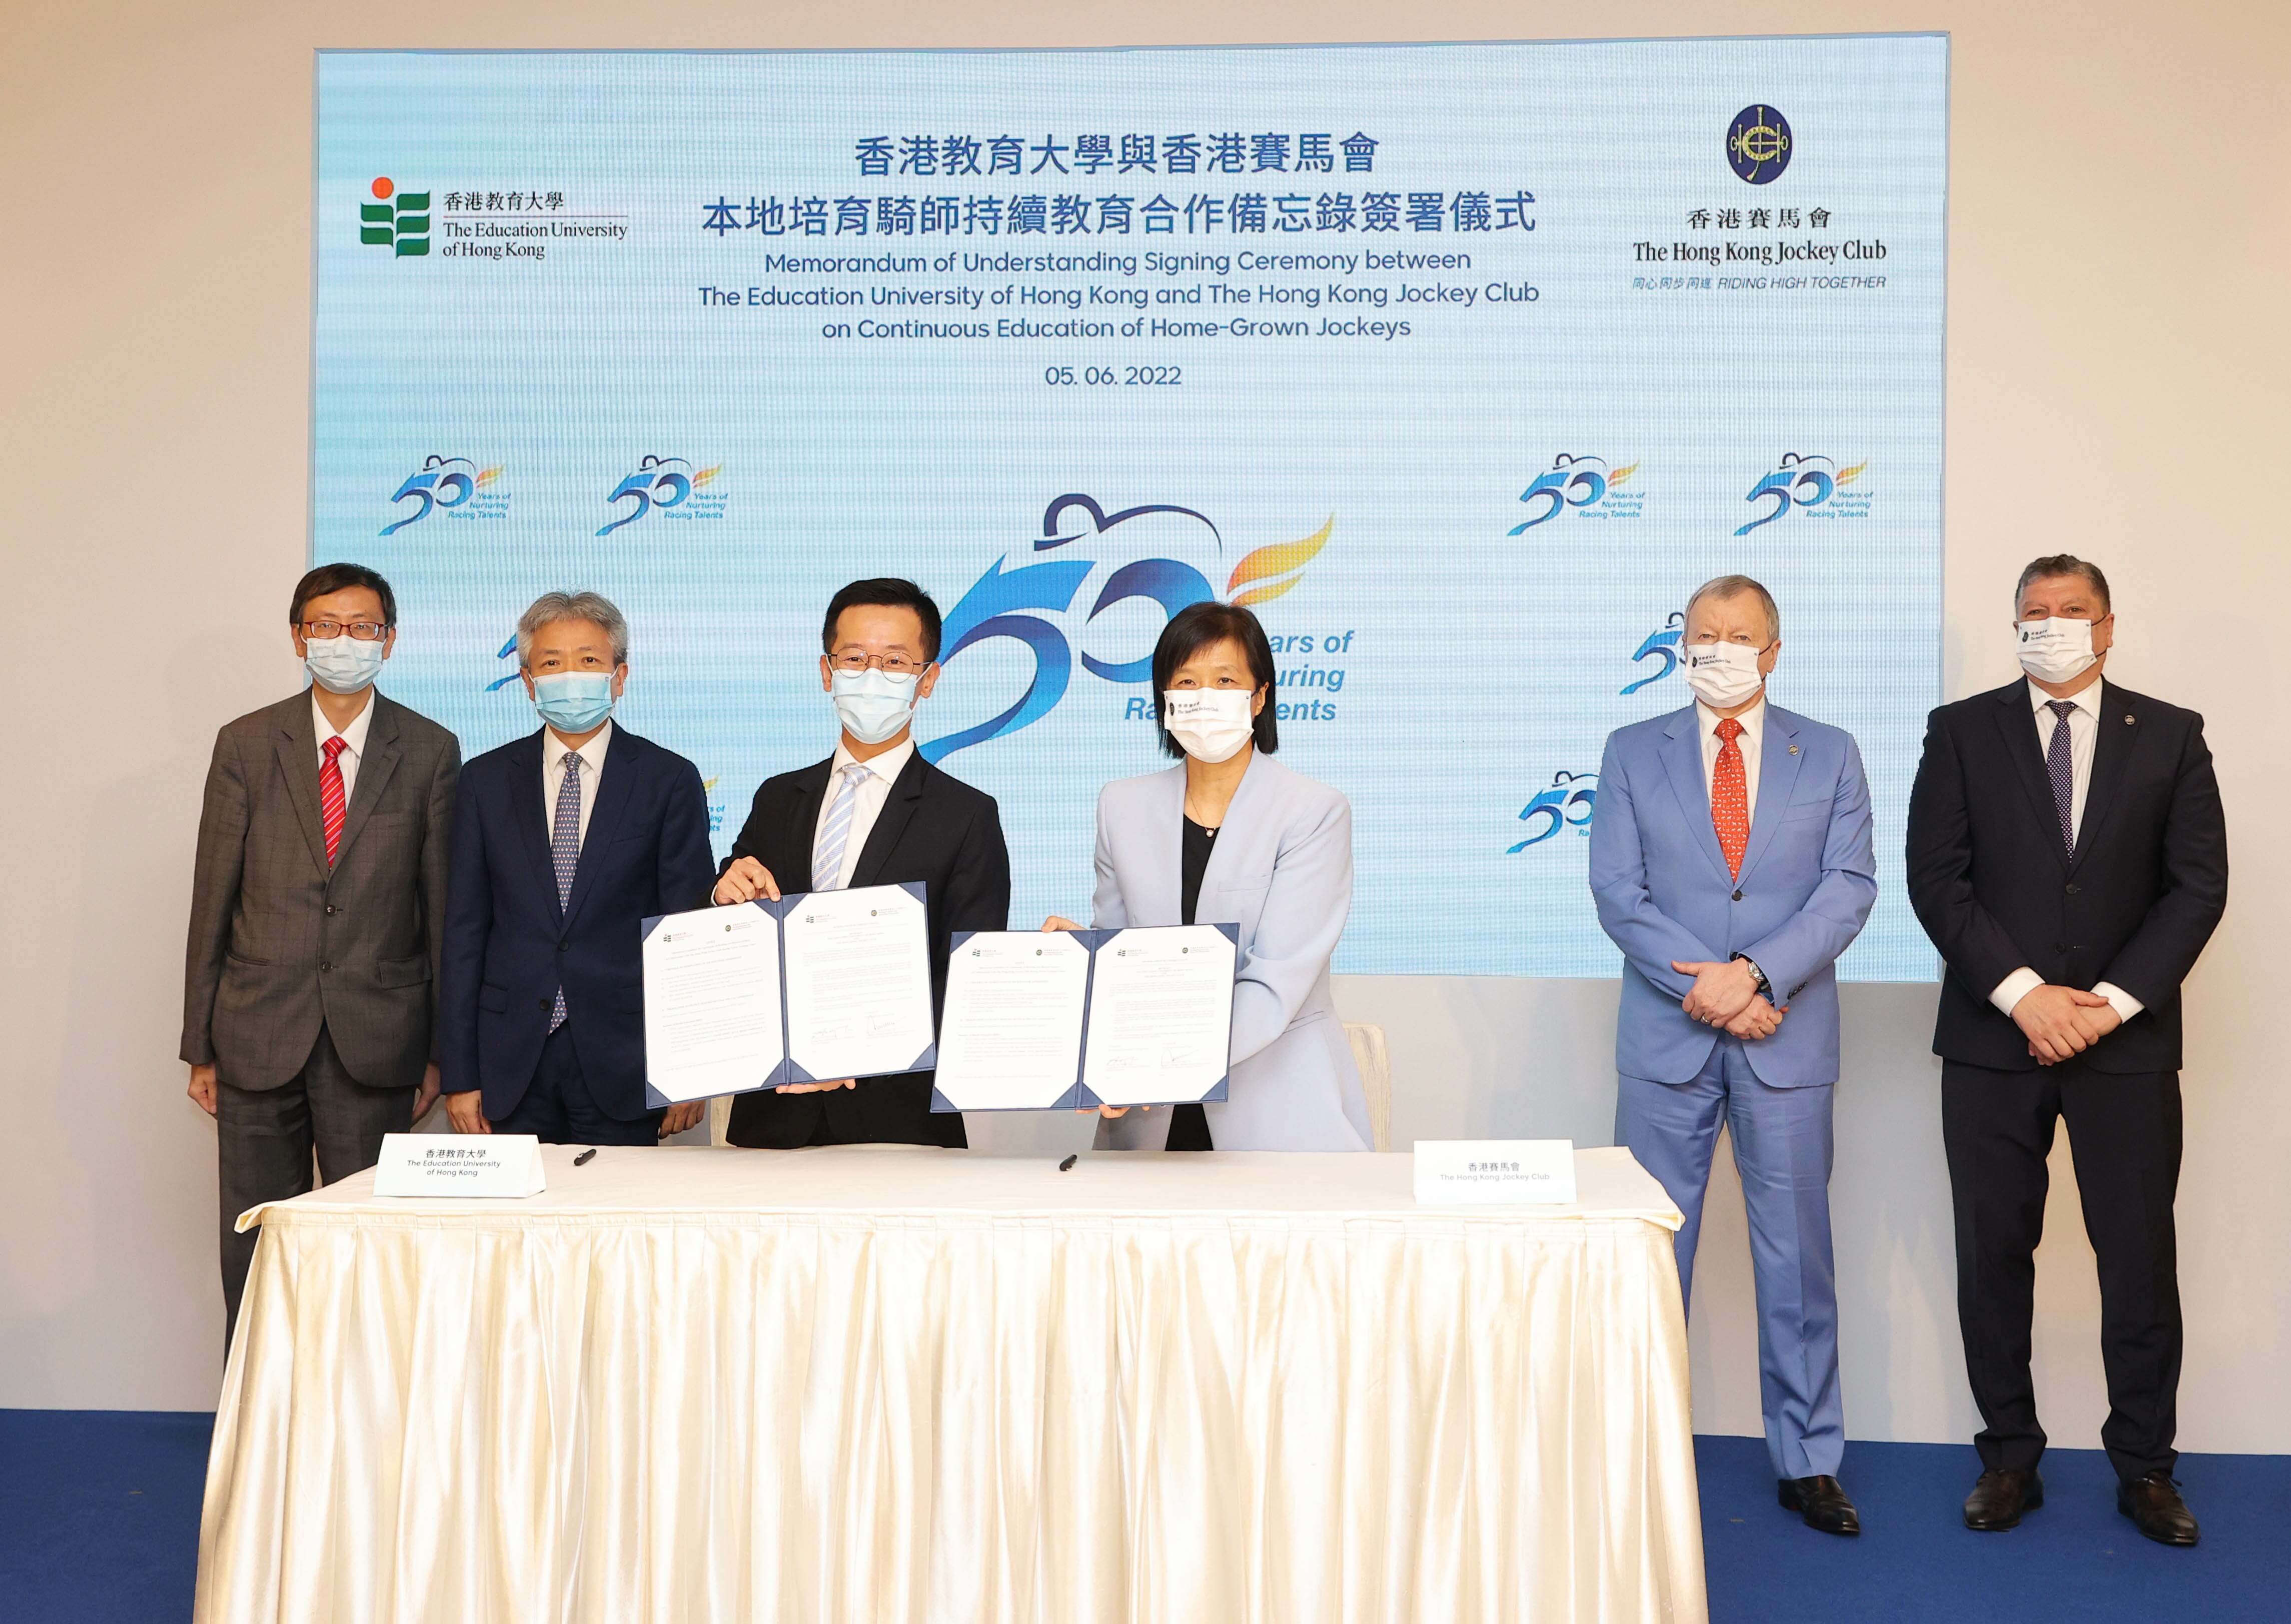 EdUHK and HKJC parties at the MOU signing ceremony